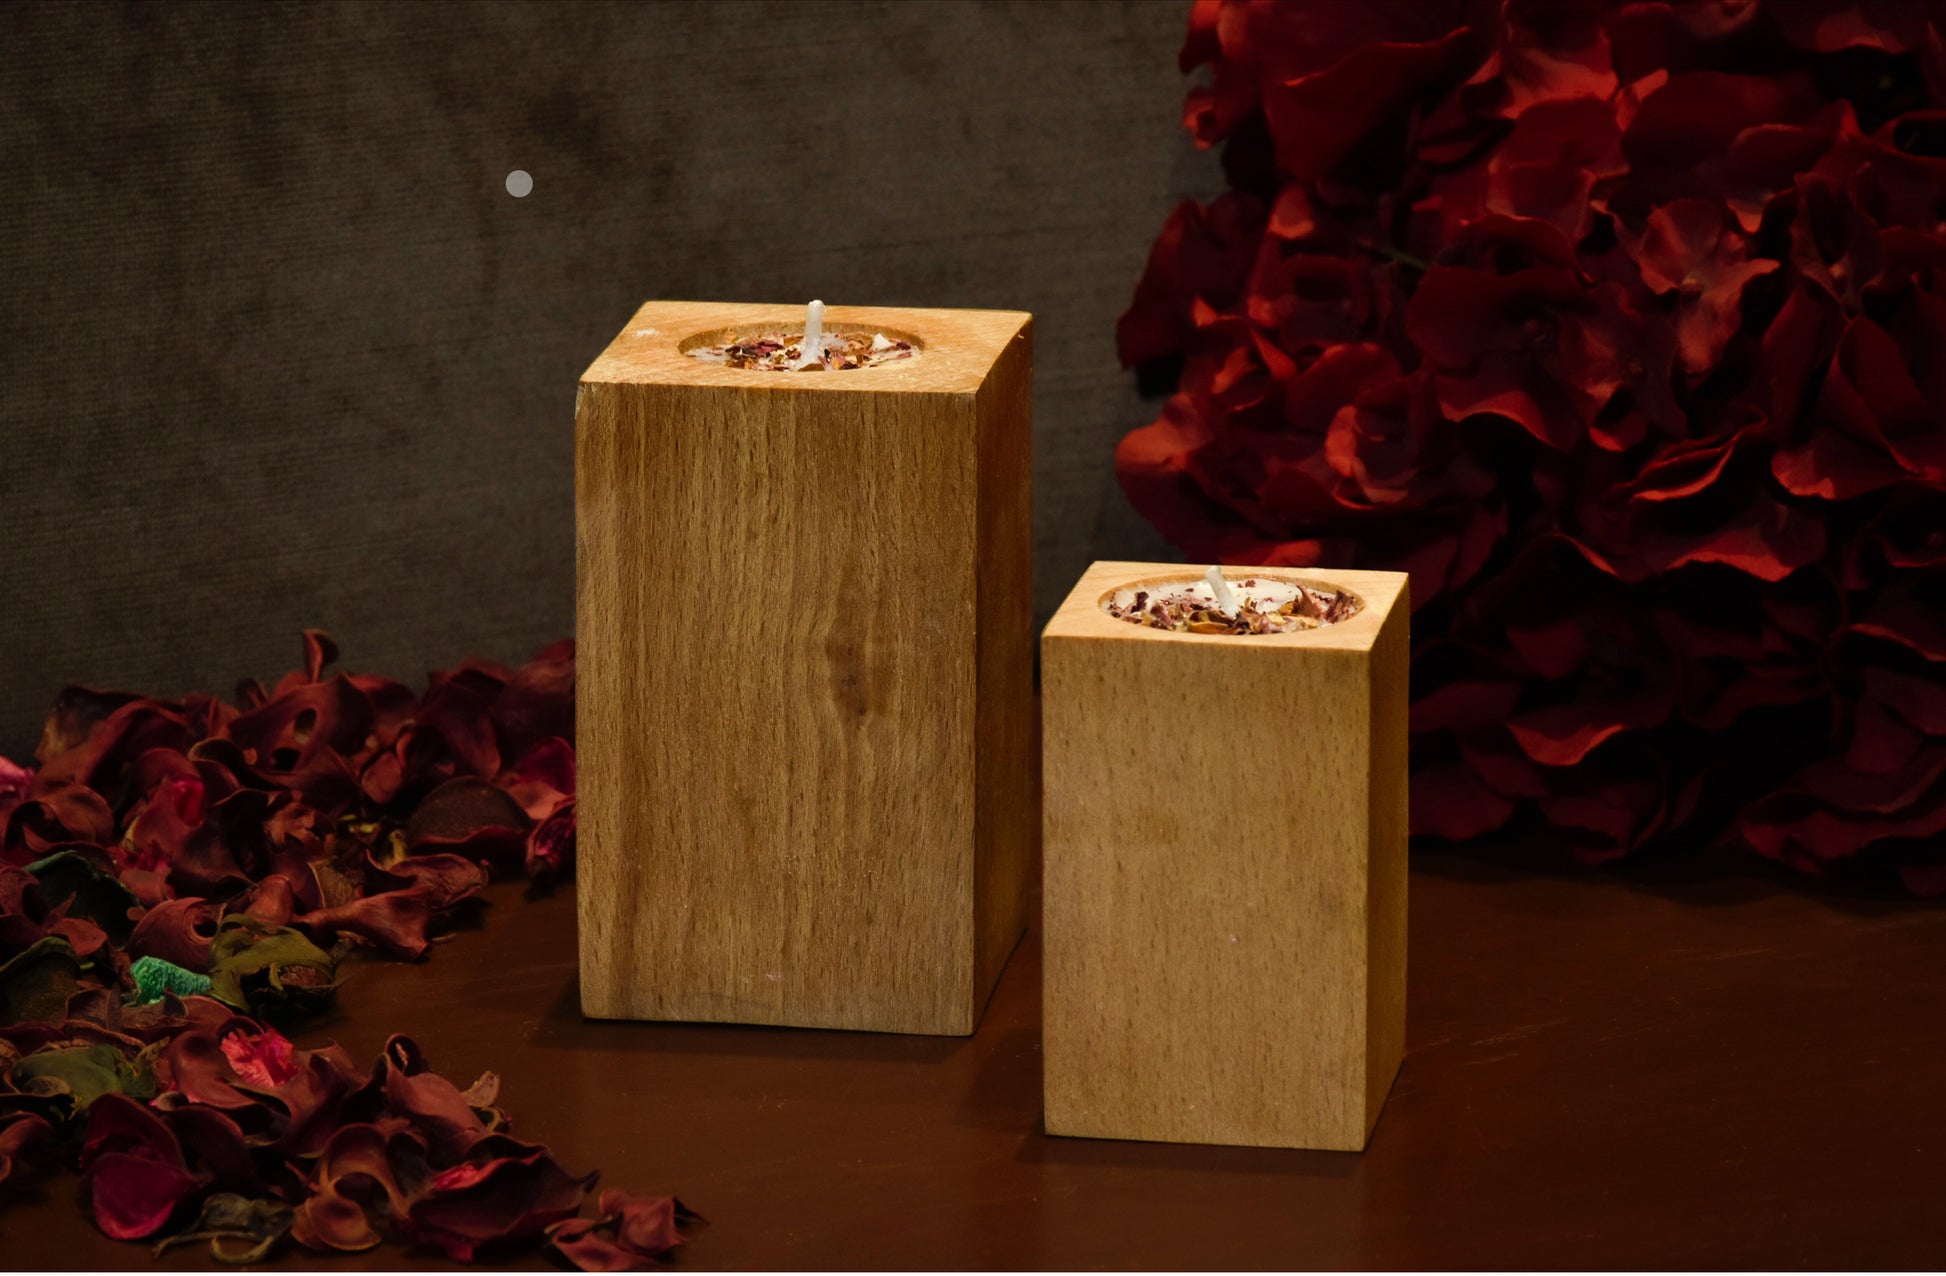  With the goodness of rose petals shining, these candles are handmade with love and are delightful to the senses. 